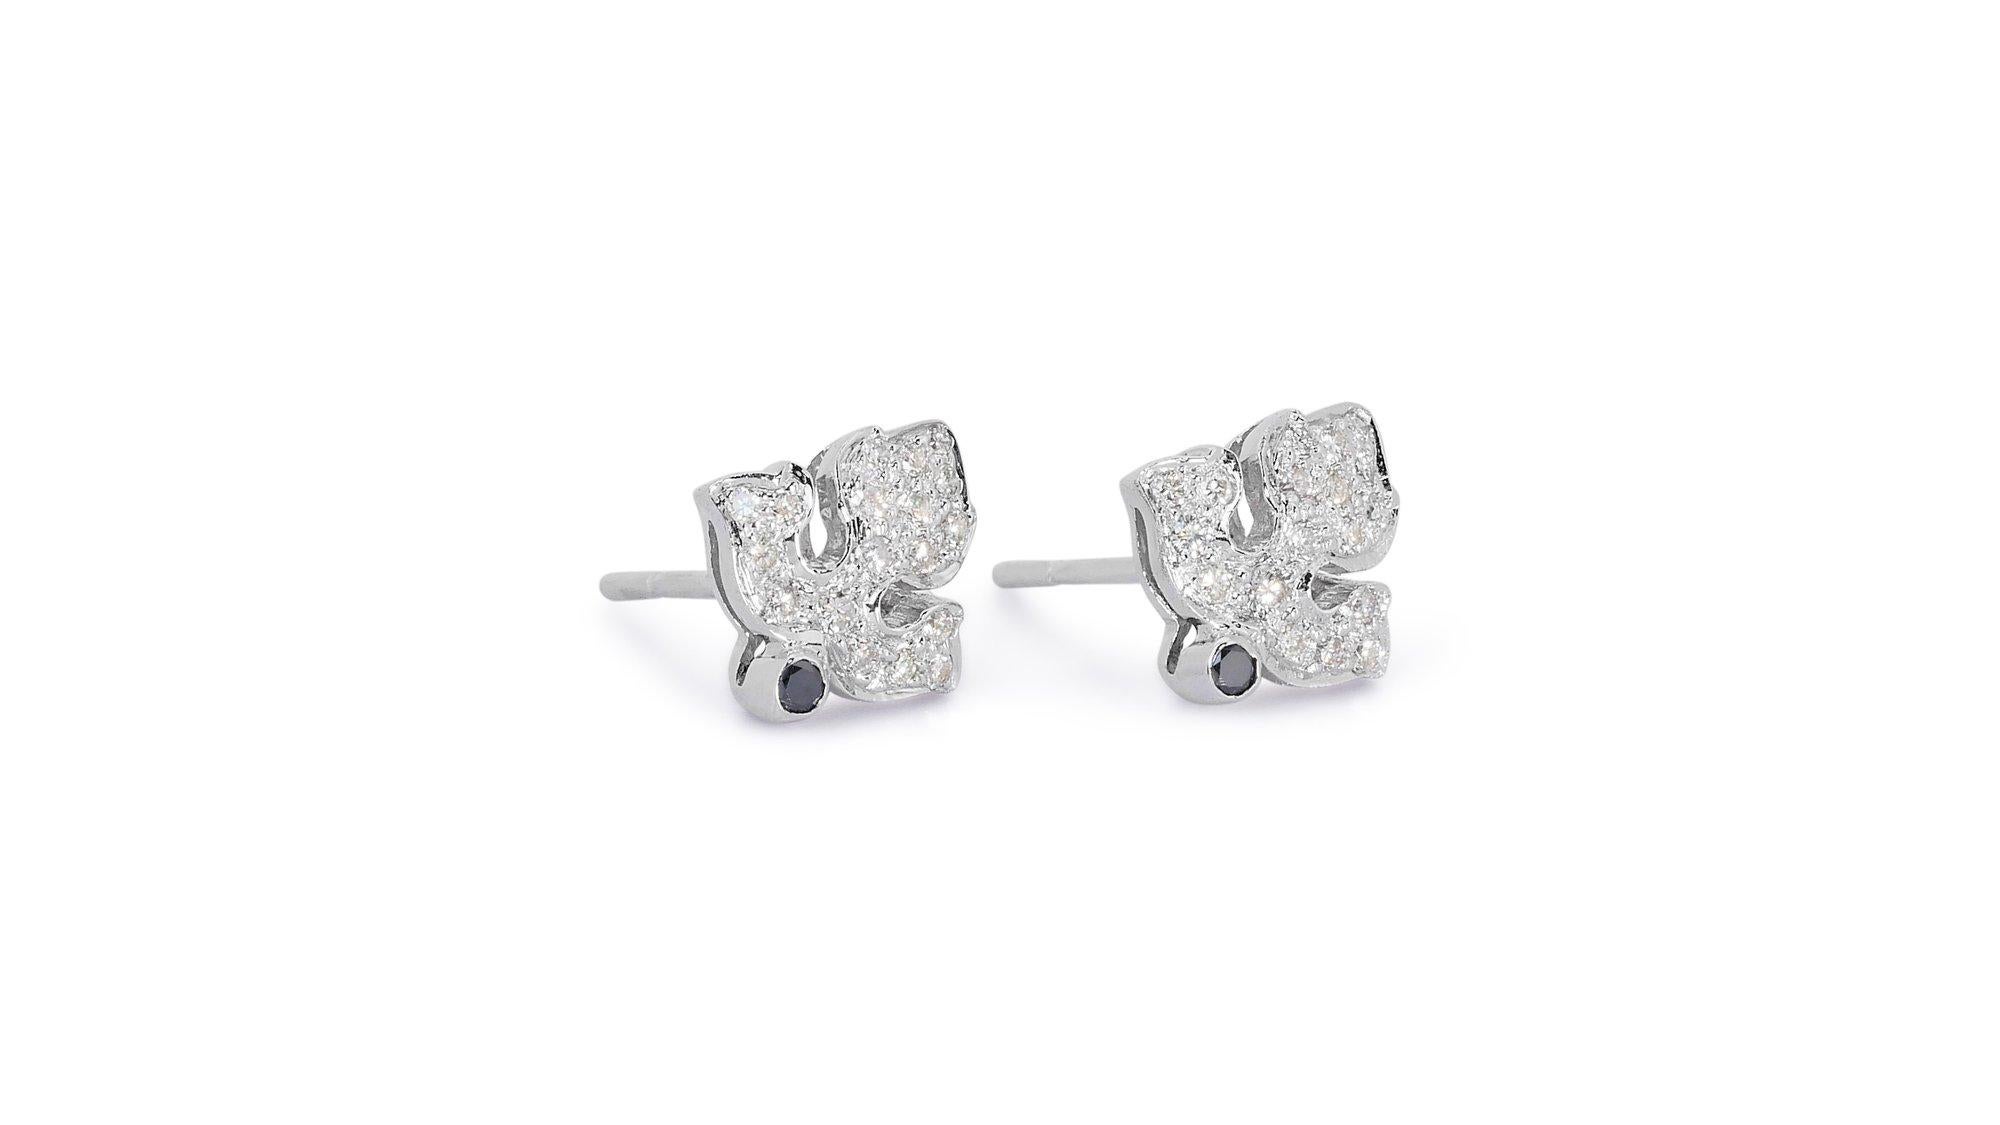 Dazzling 18k White Gold Stud Earrings W/ 0.88 Ct Natural Diamonds Aig Cert In New Condition For Sale In רמת גן, IL